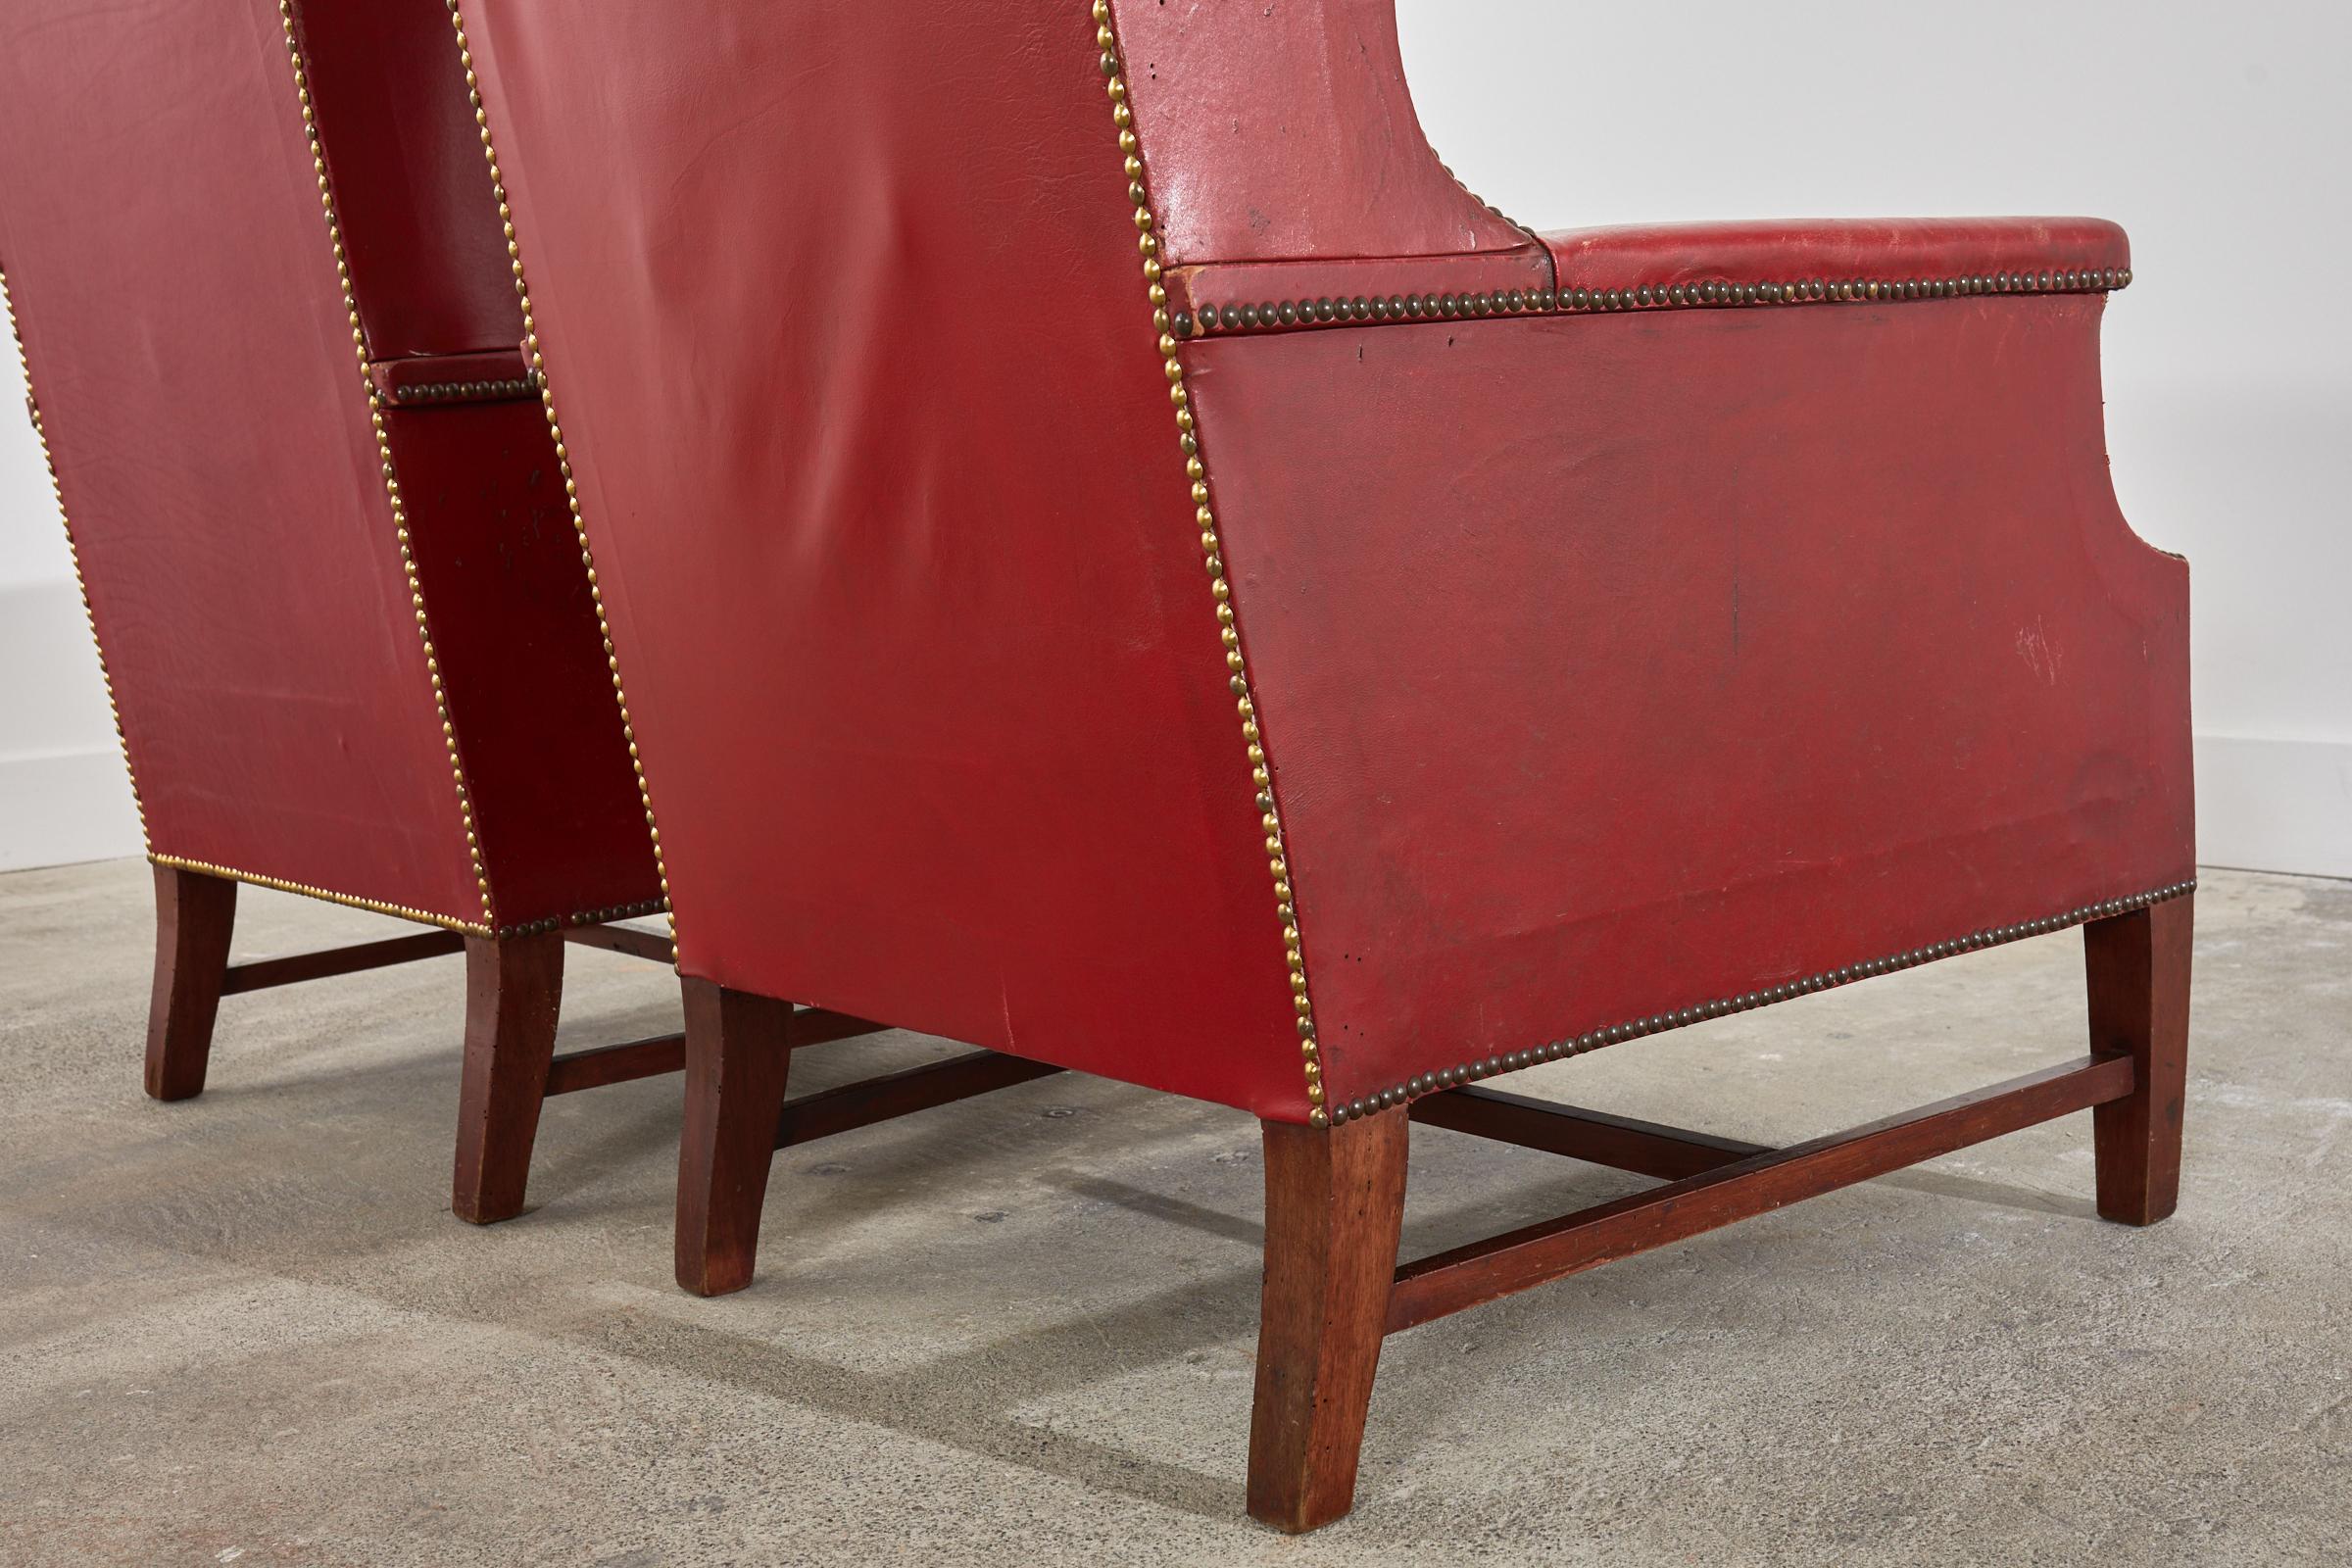 Pair of French Art Deco Cherry Red Leather Wingback Chairs For Sale 4